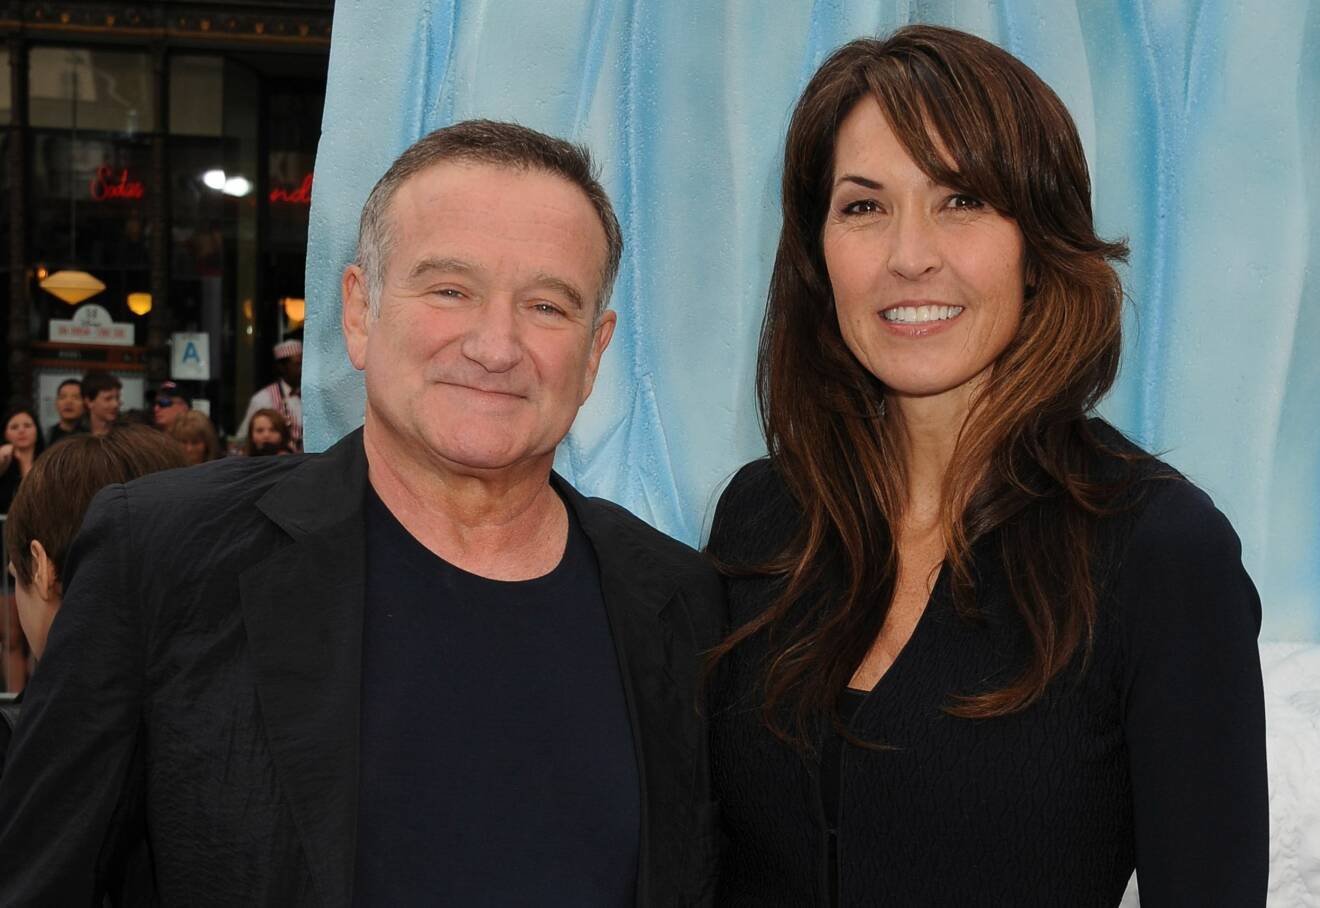 (Nov 13, 2011 - Hollywood, CA)..Robin Williams and Susan Schneider attend the Los Angeles Premiere of Happy Feet Two at Graumans Chinese Theatre. Photo by: James Murphy/Loud & Clear. Code: 4025 COPYRIGHT STELLA PICTURES